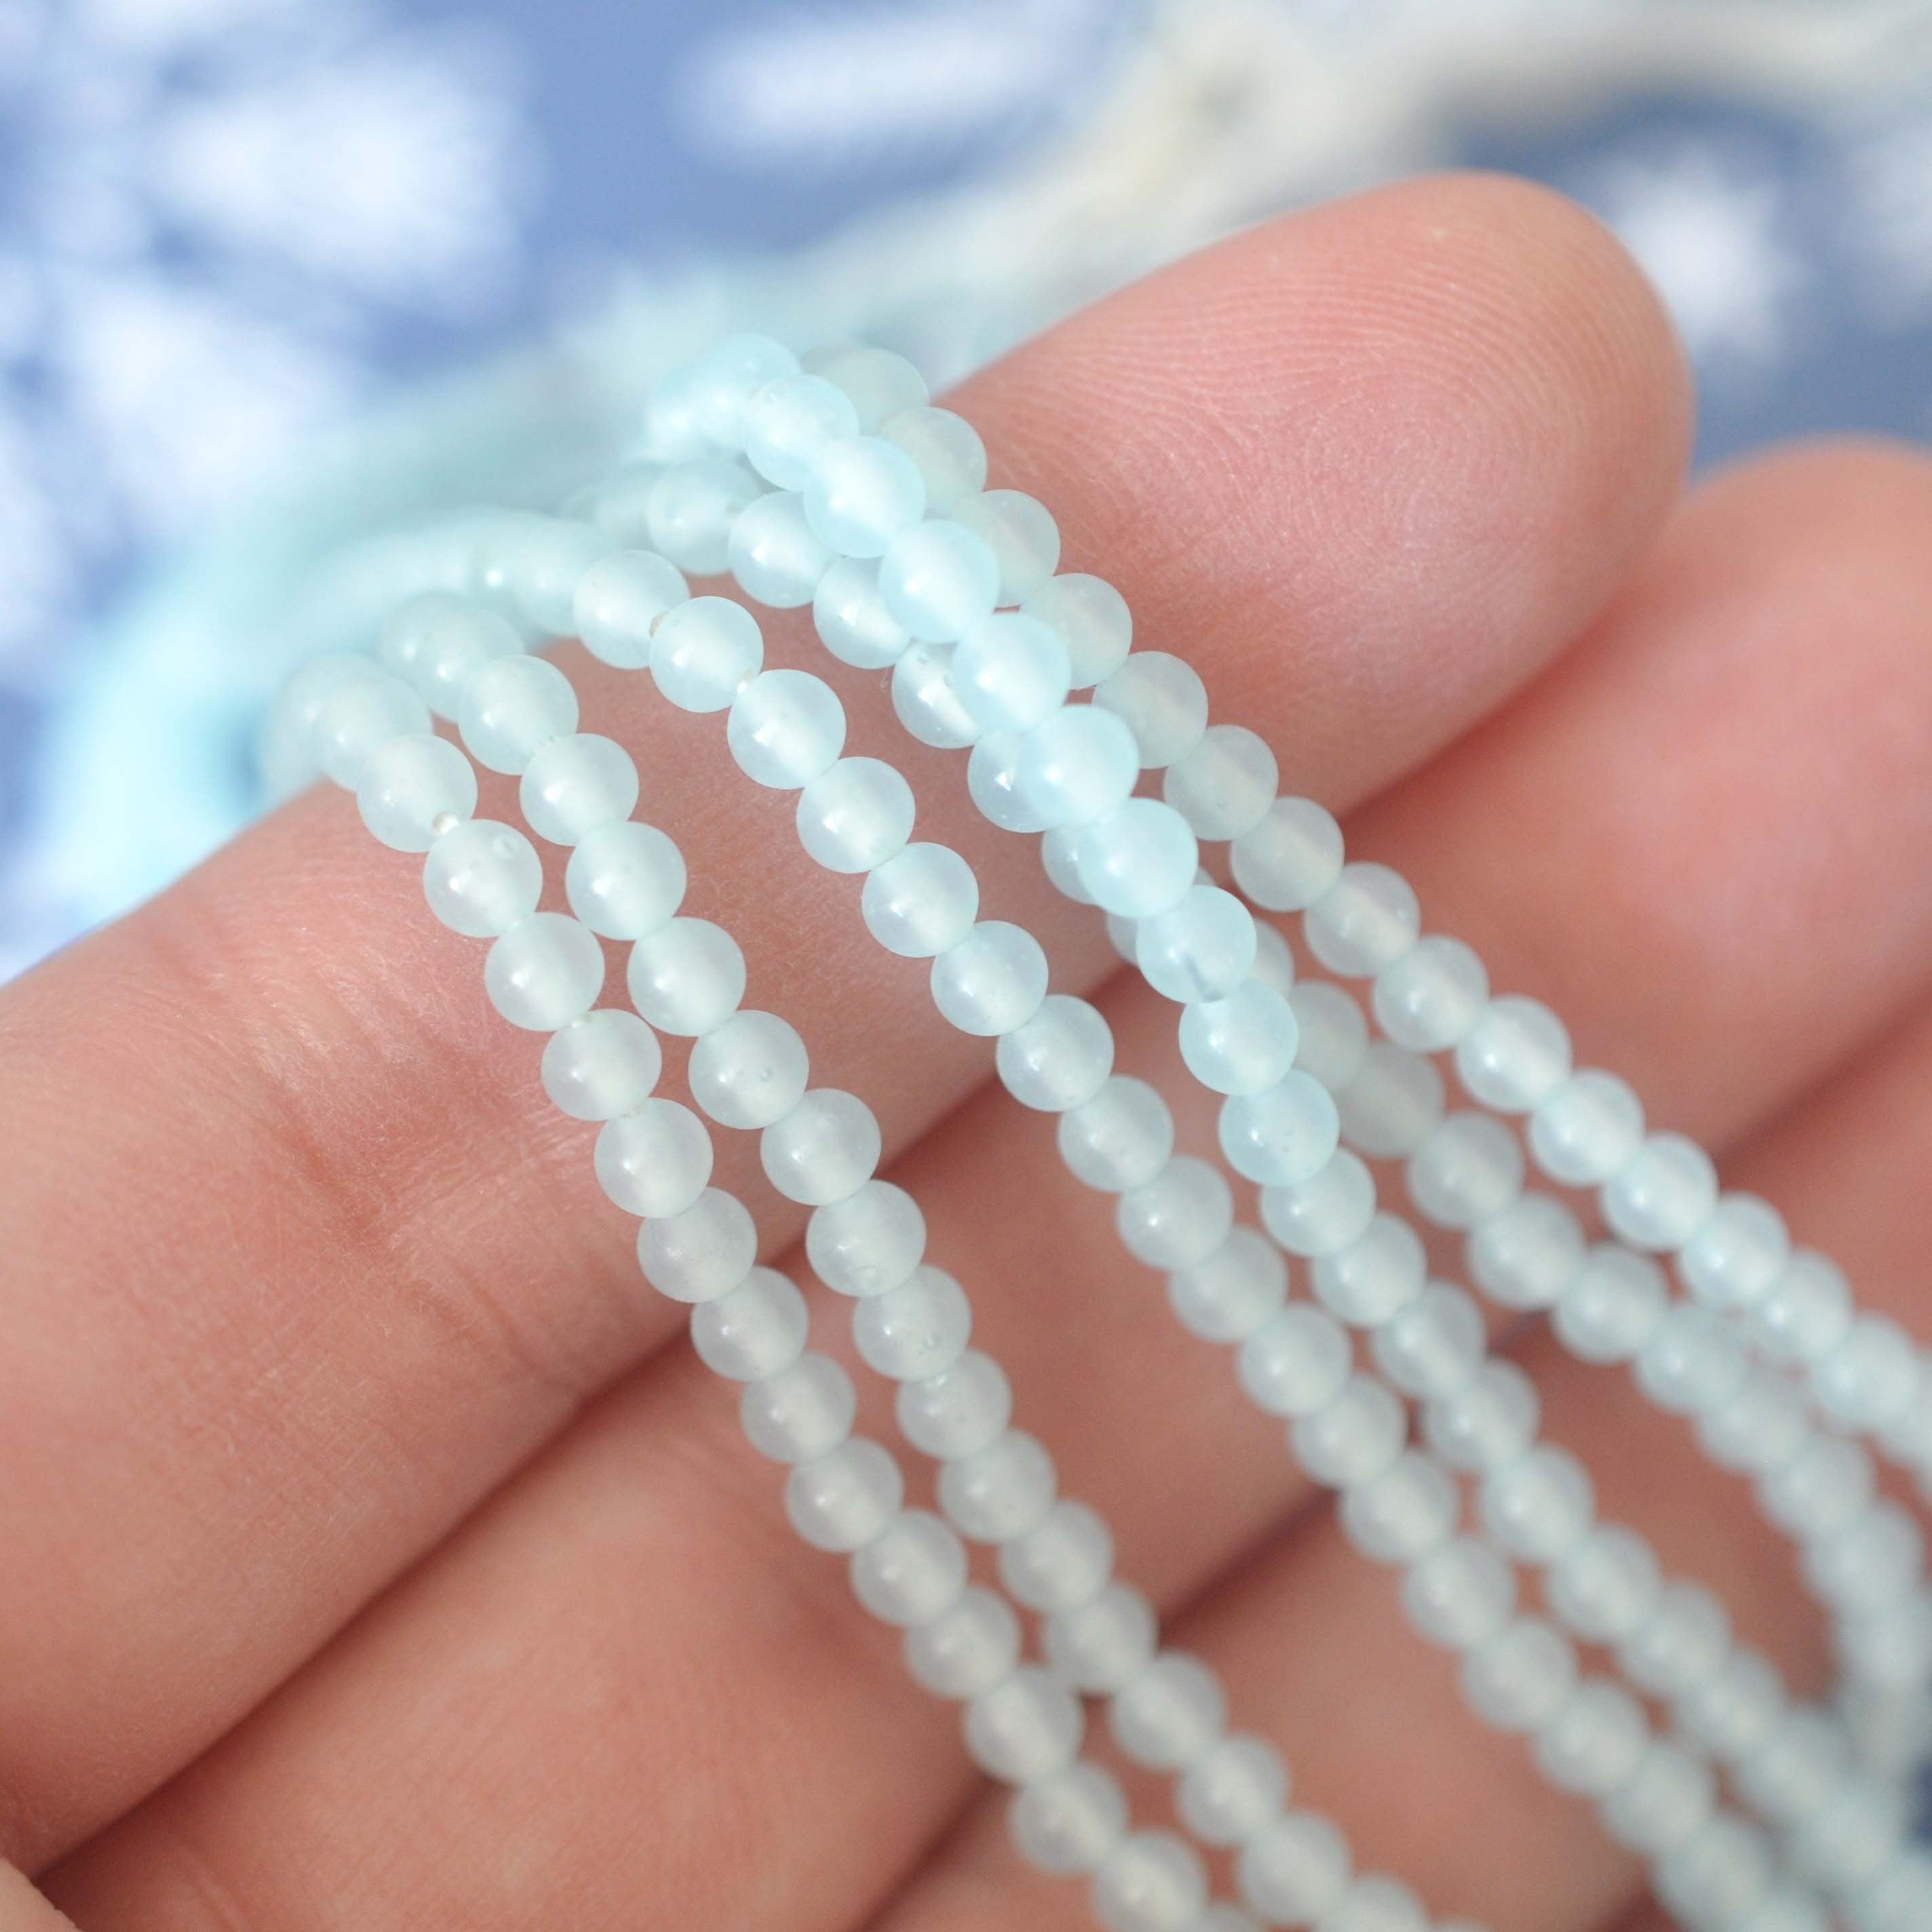 Icy Blue 4MM Round Glass Beads Vintage Cherry Brand - 100 Beads